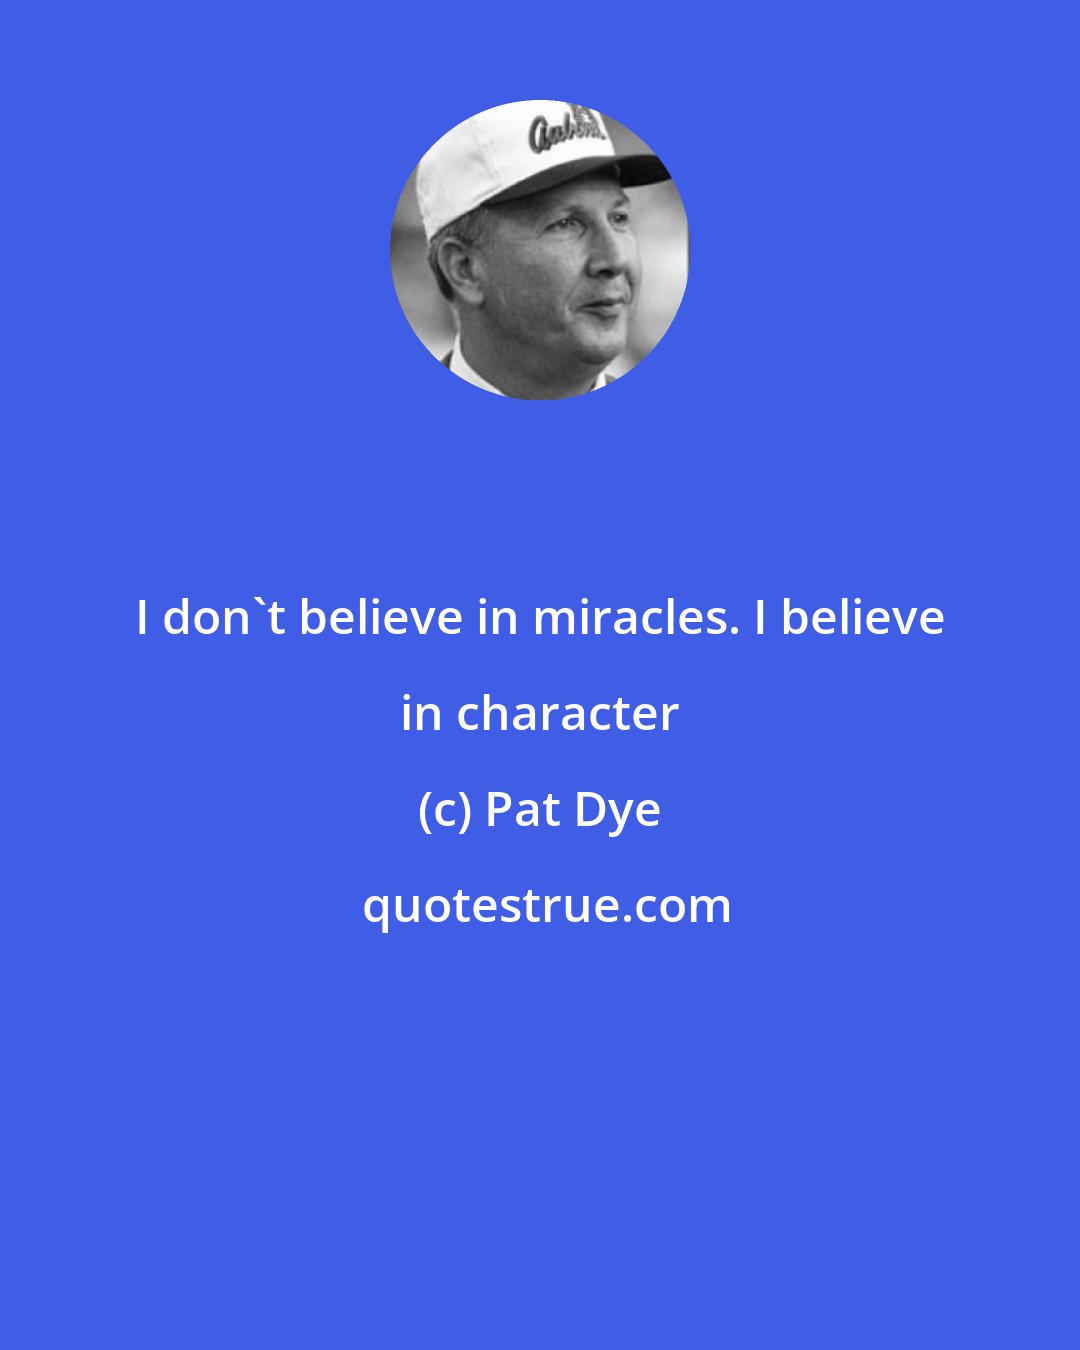 Pat Dye: I don't believe in miracles. I believe in character